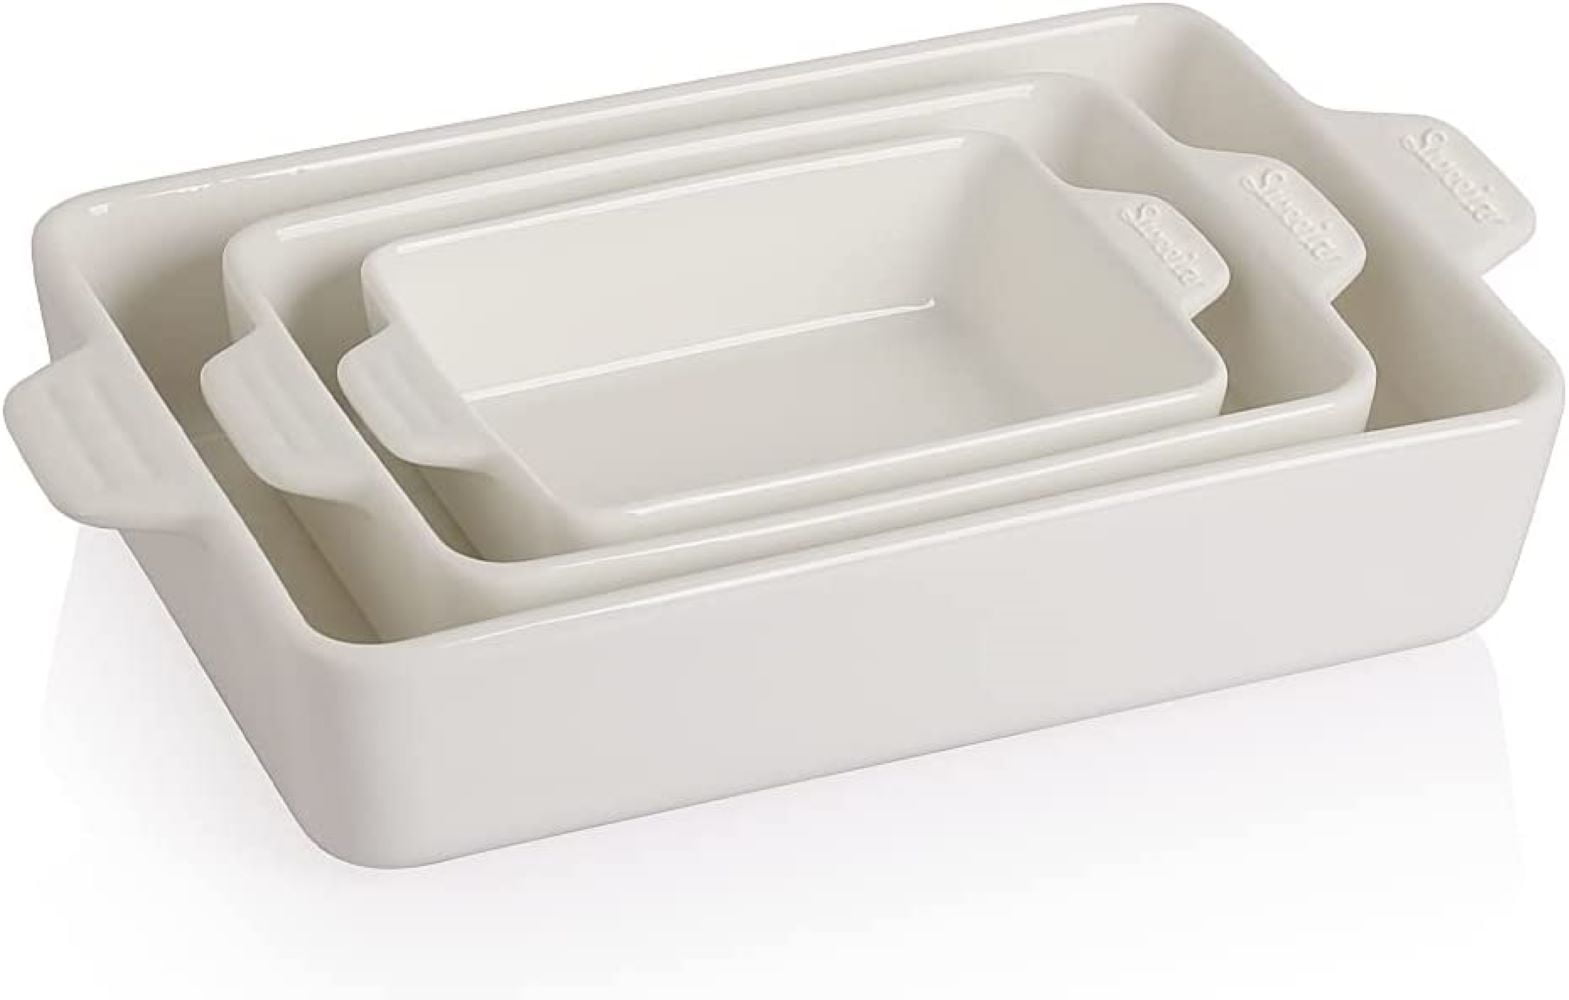 Sweejar Ceramic Bakeware Set, Rectangular Baking Dish Lasagna Pans for  Cooking, Kitchen, Cake Dinner, Banquet and Daily Use, 11.8 x 7.8 x 2.75  Inches